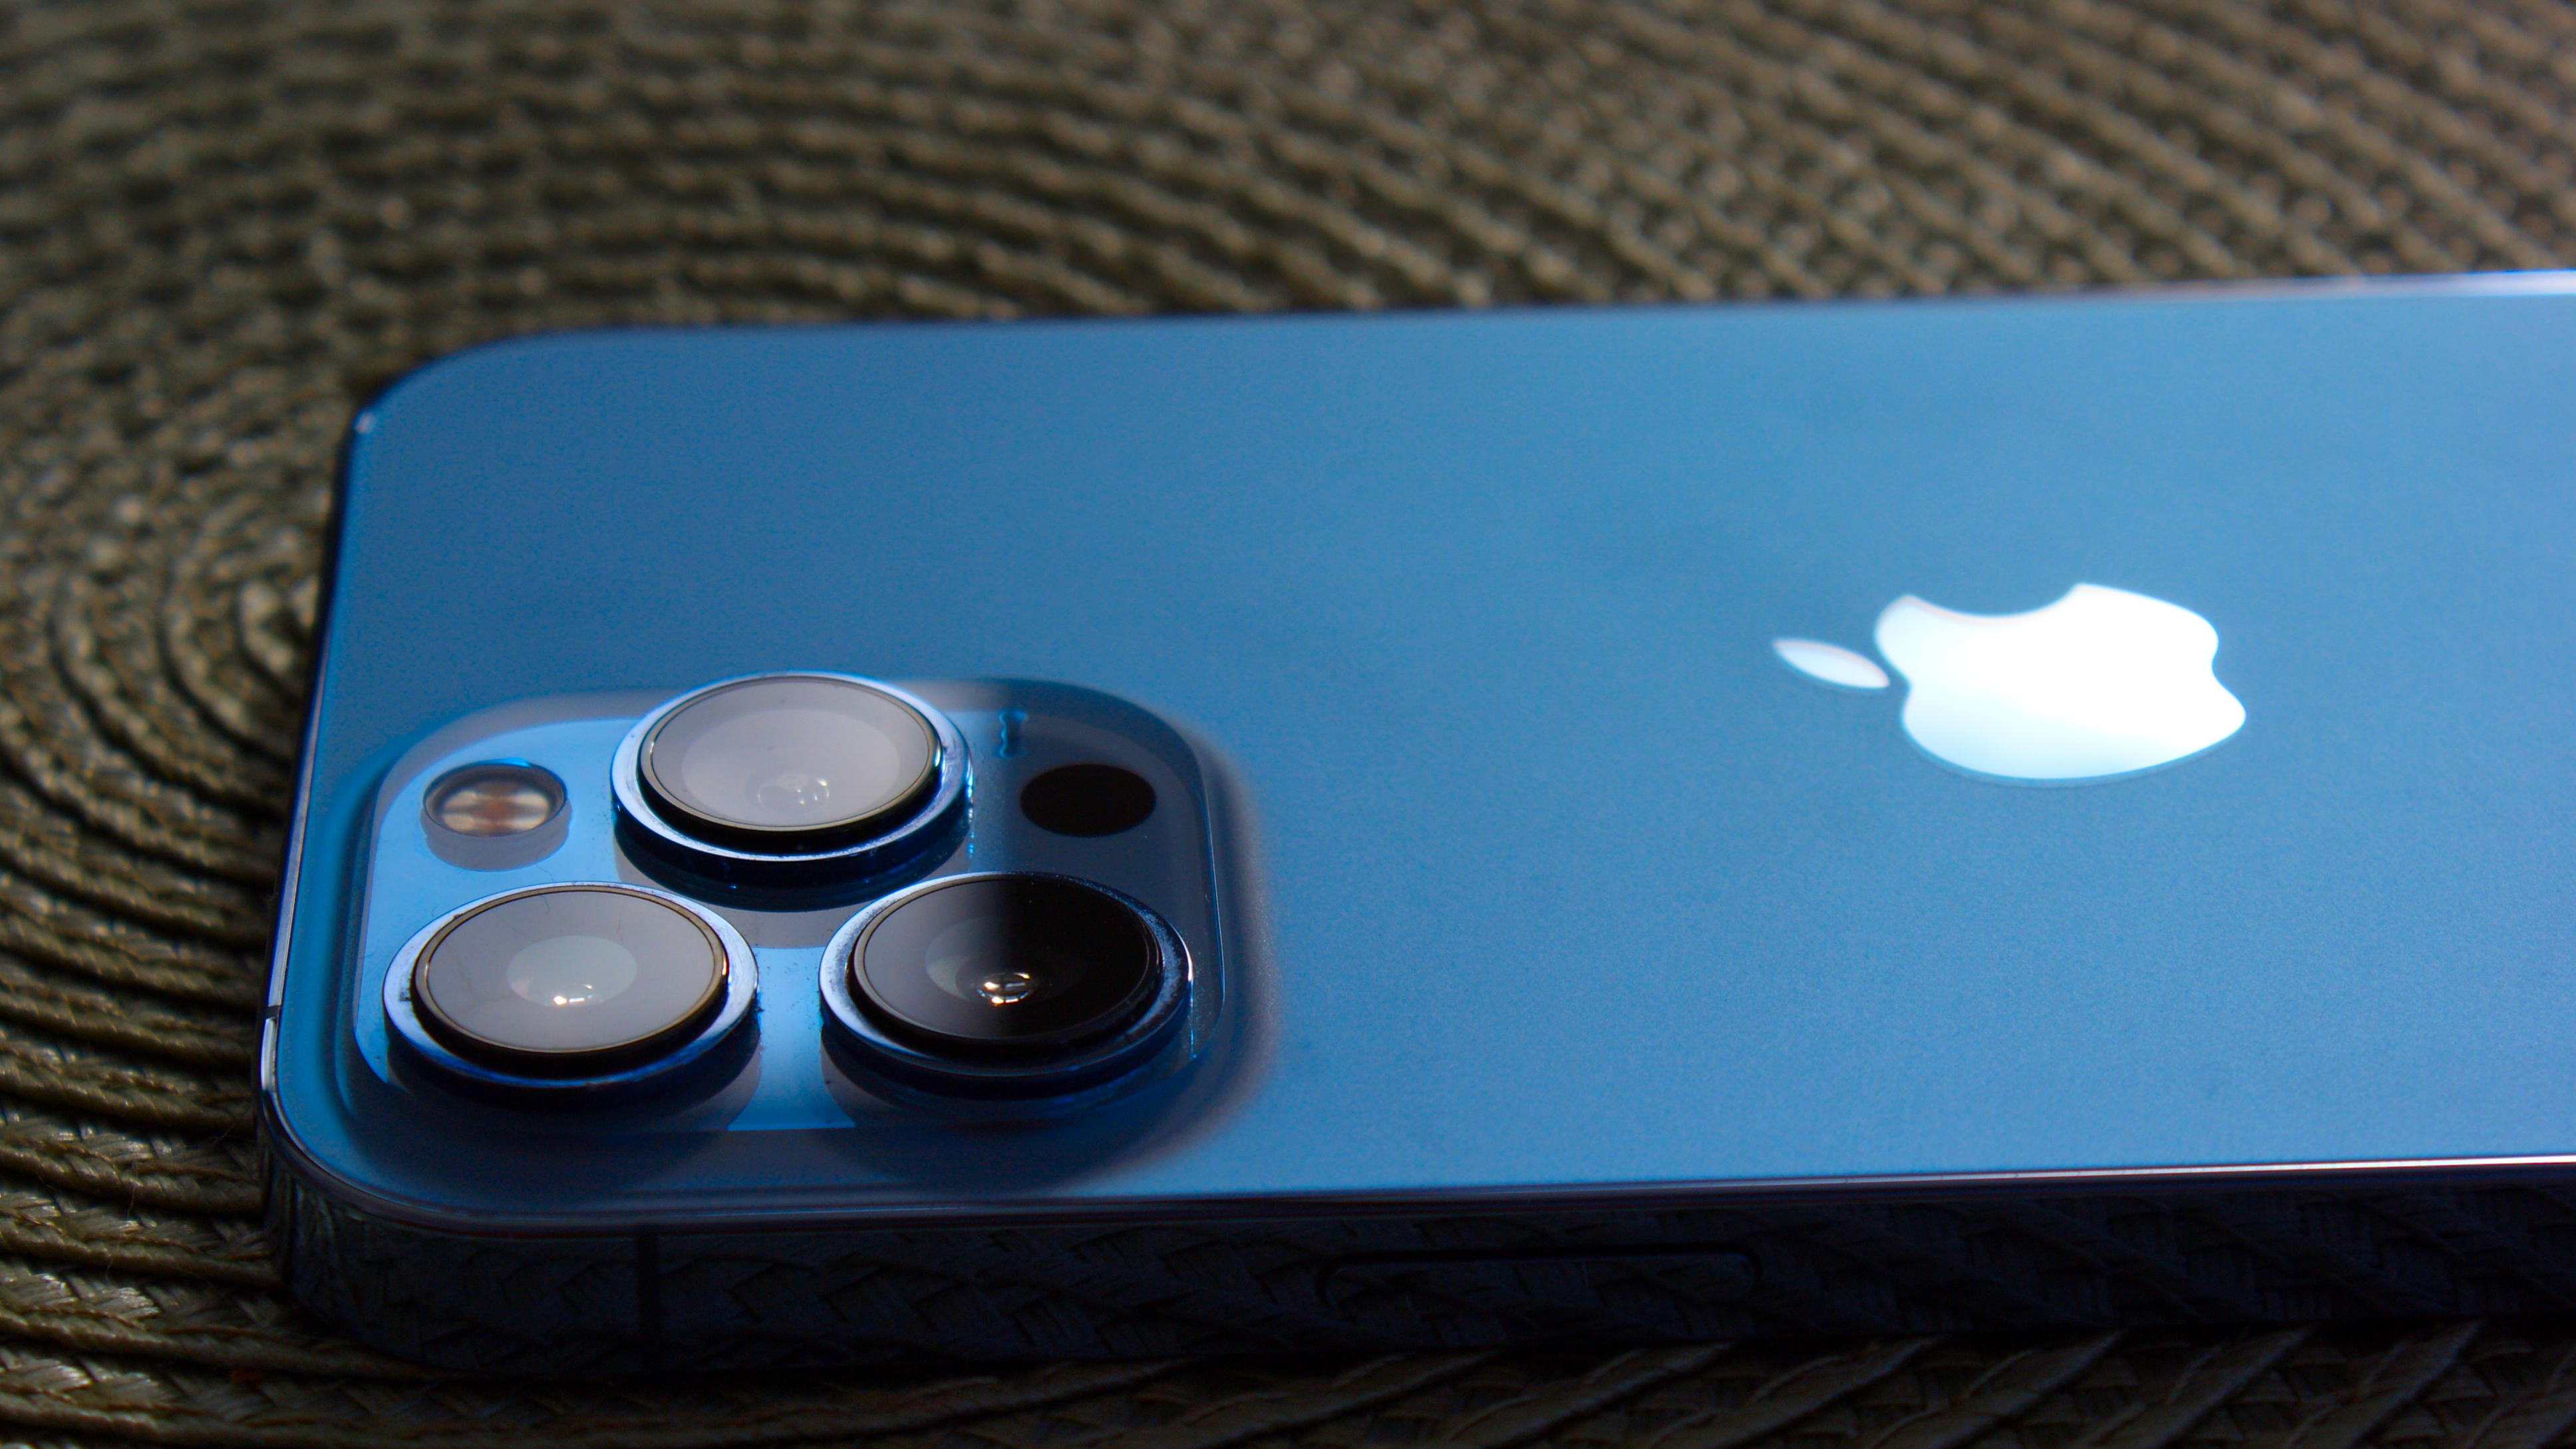 A close-up of the camera pad on the iPhone 13 Pro Max